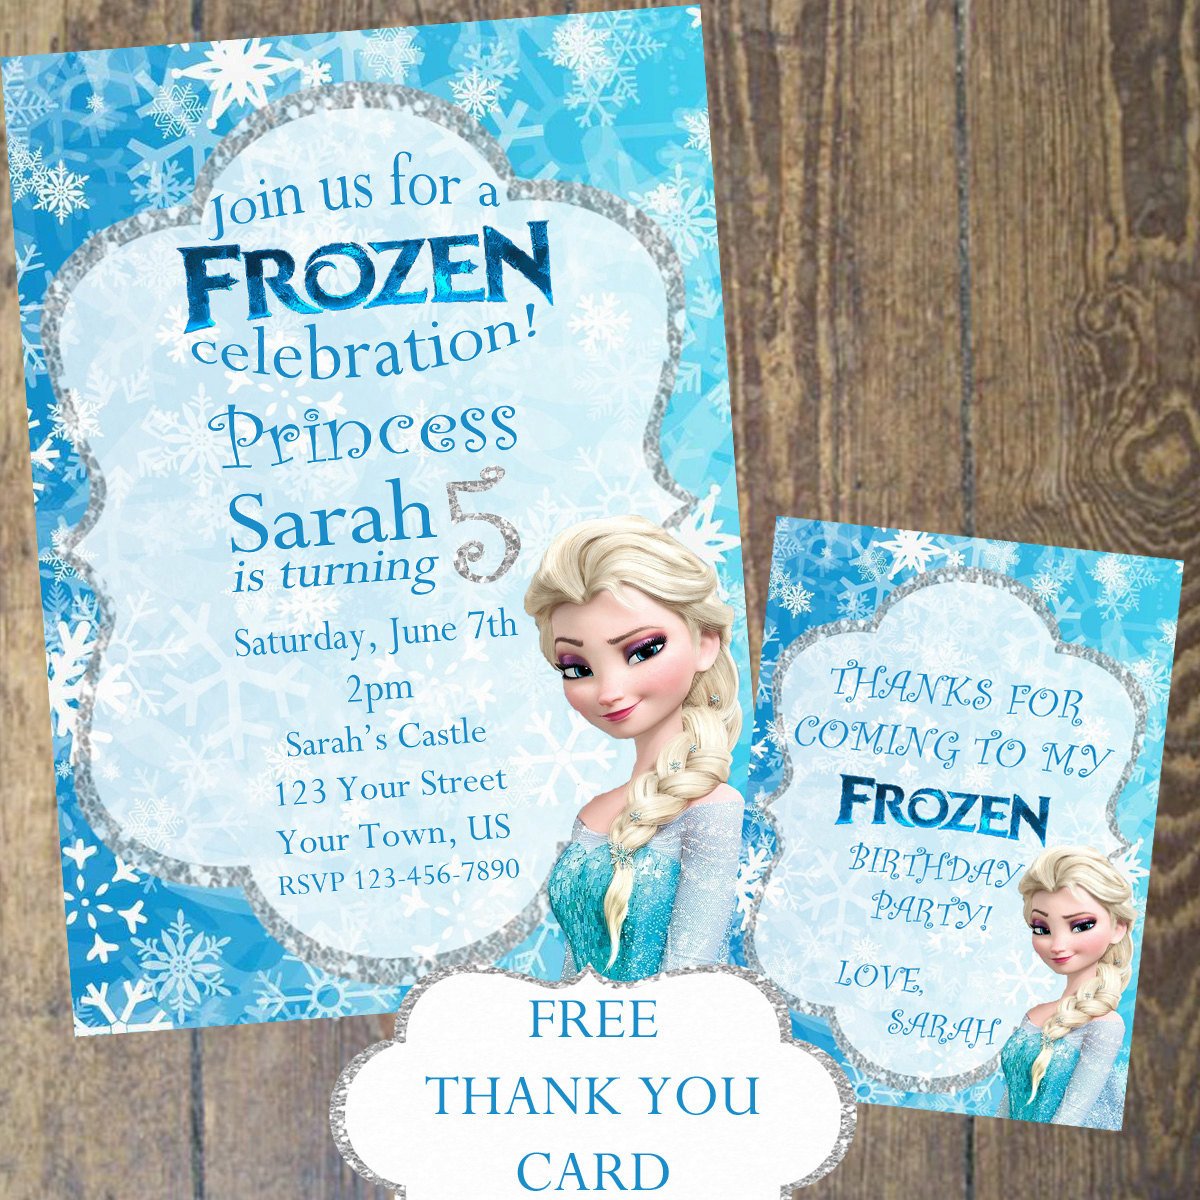 Frozen invitation and Thank You Card by DesignsbyCarrieLee